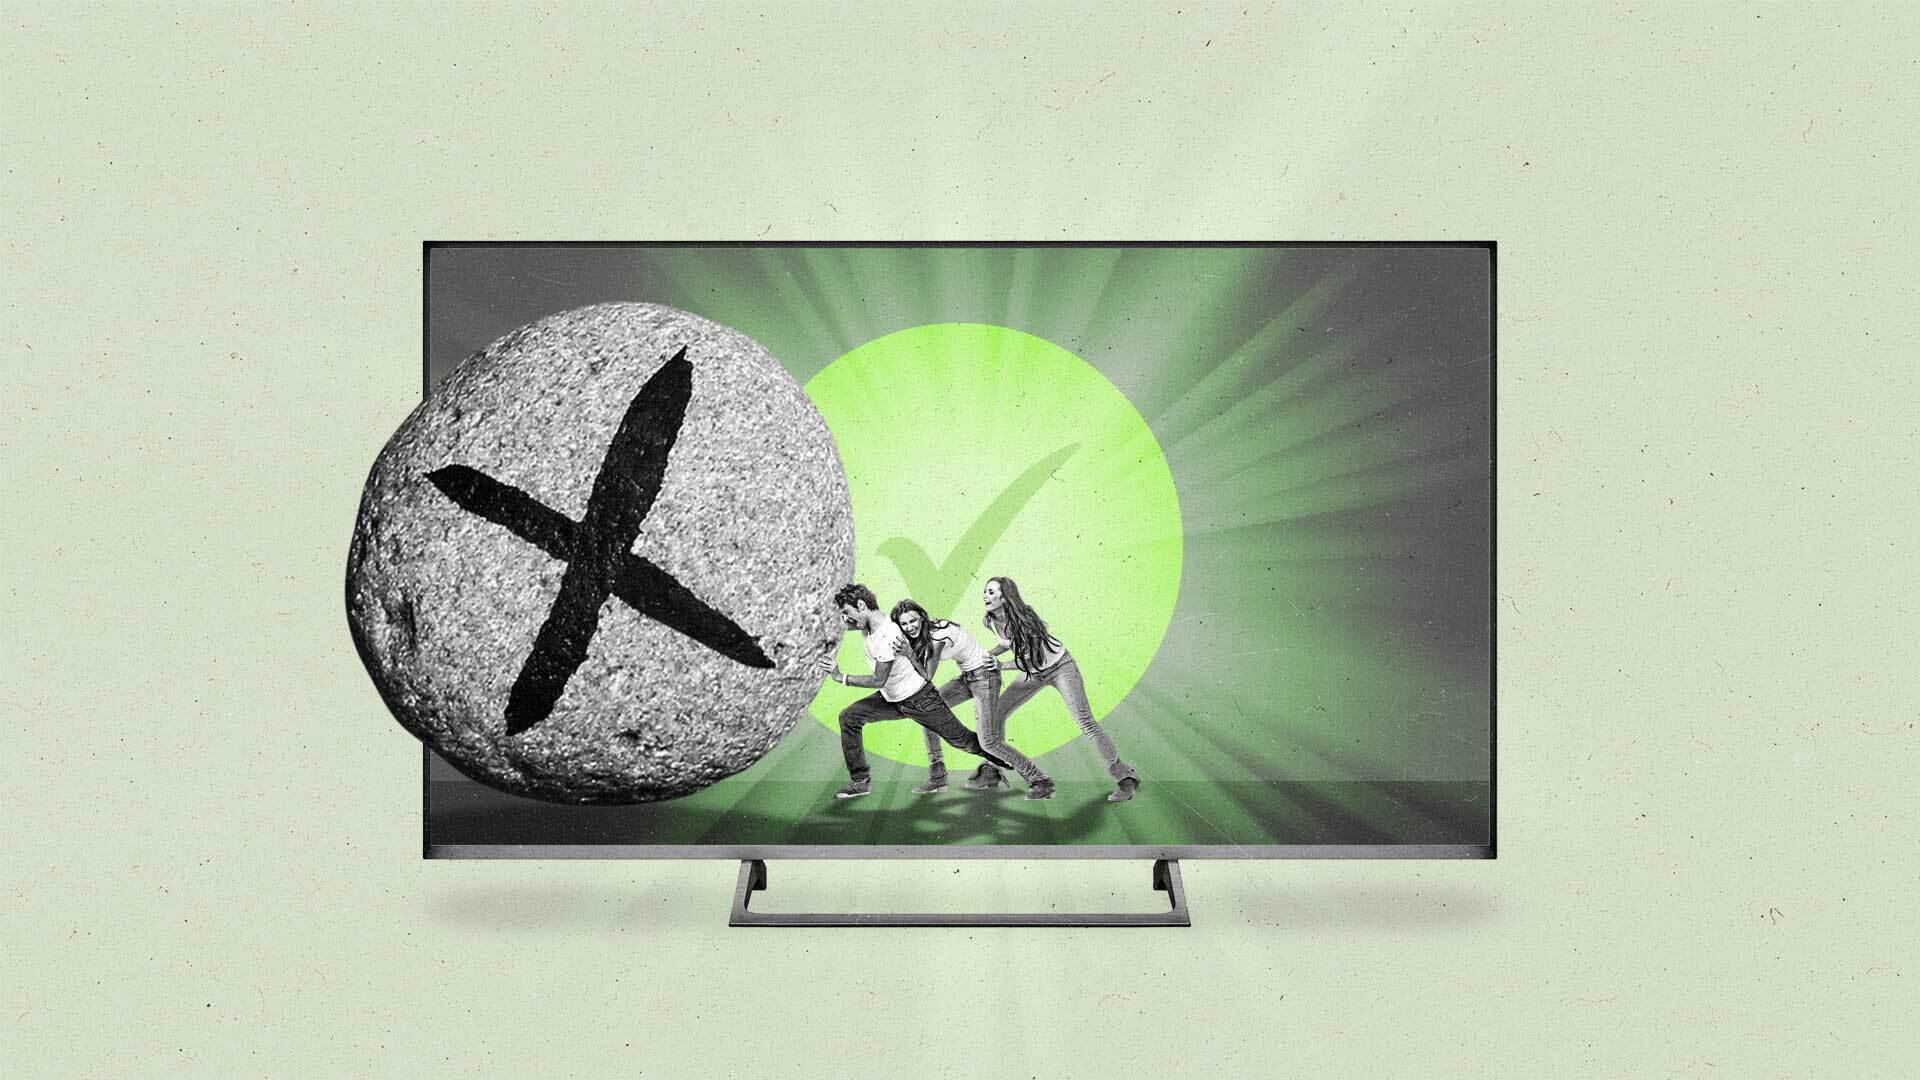 A group of people in a connected TV roll away a boulder with an X on it to reveal a glowing green checkmark.